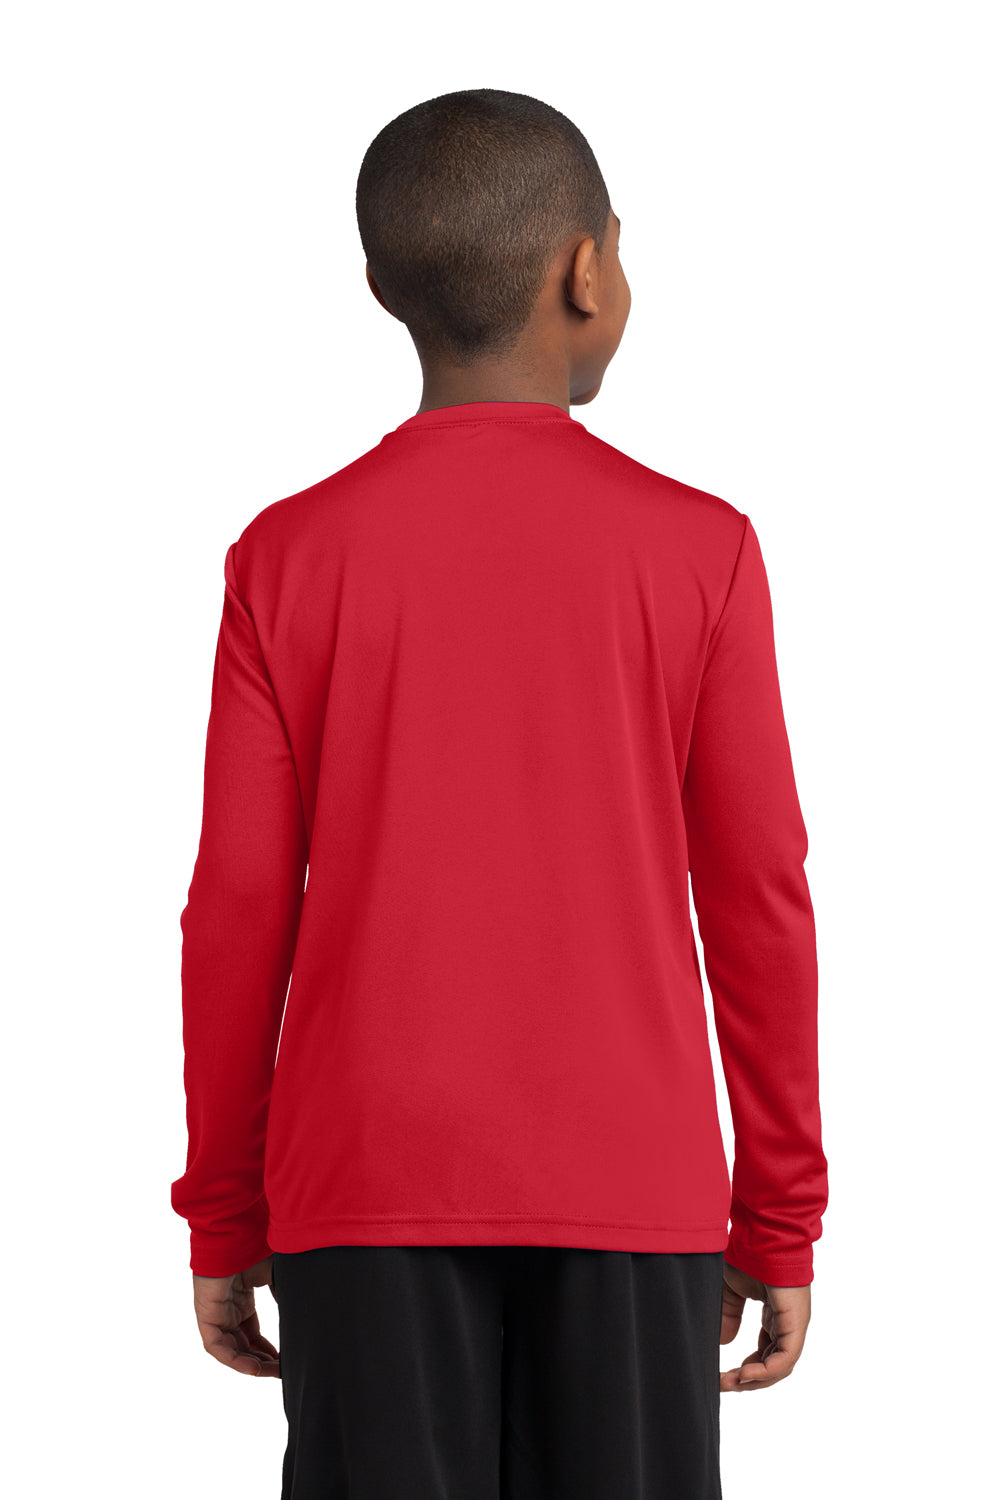 Sport-Tek YST350LS Youth Competitor Moisture Wicking Long Sleeve Crewneck T-Shirt Red Back